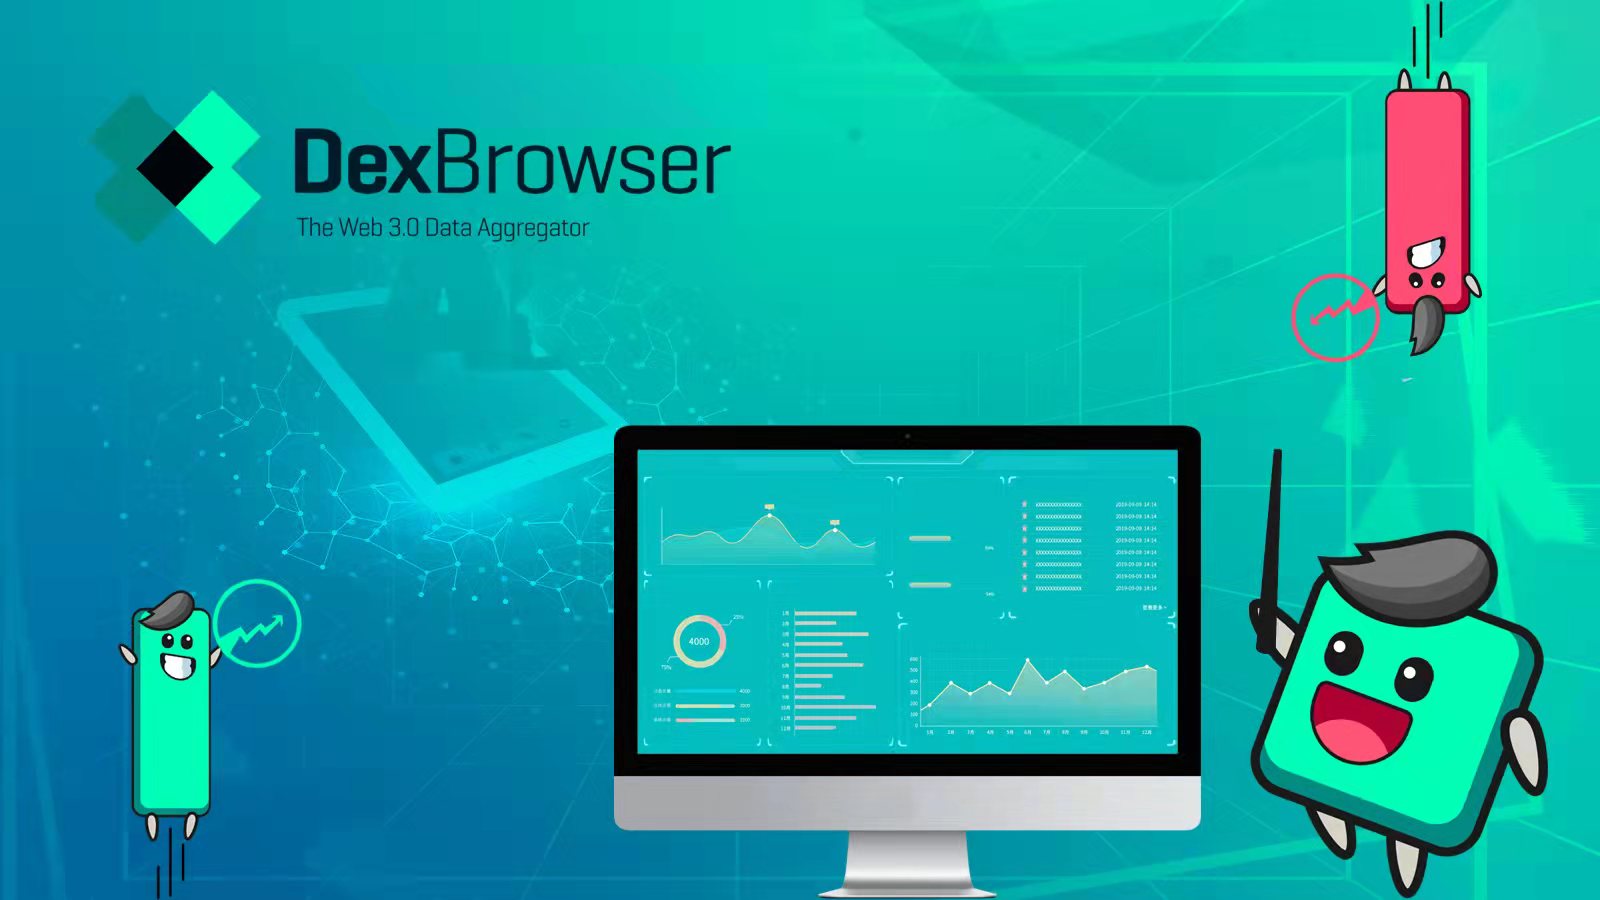 Dexbrowser, the Web3 data aggregator and your future DEX super platform